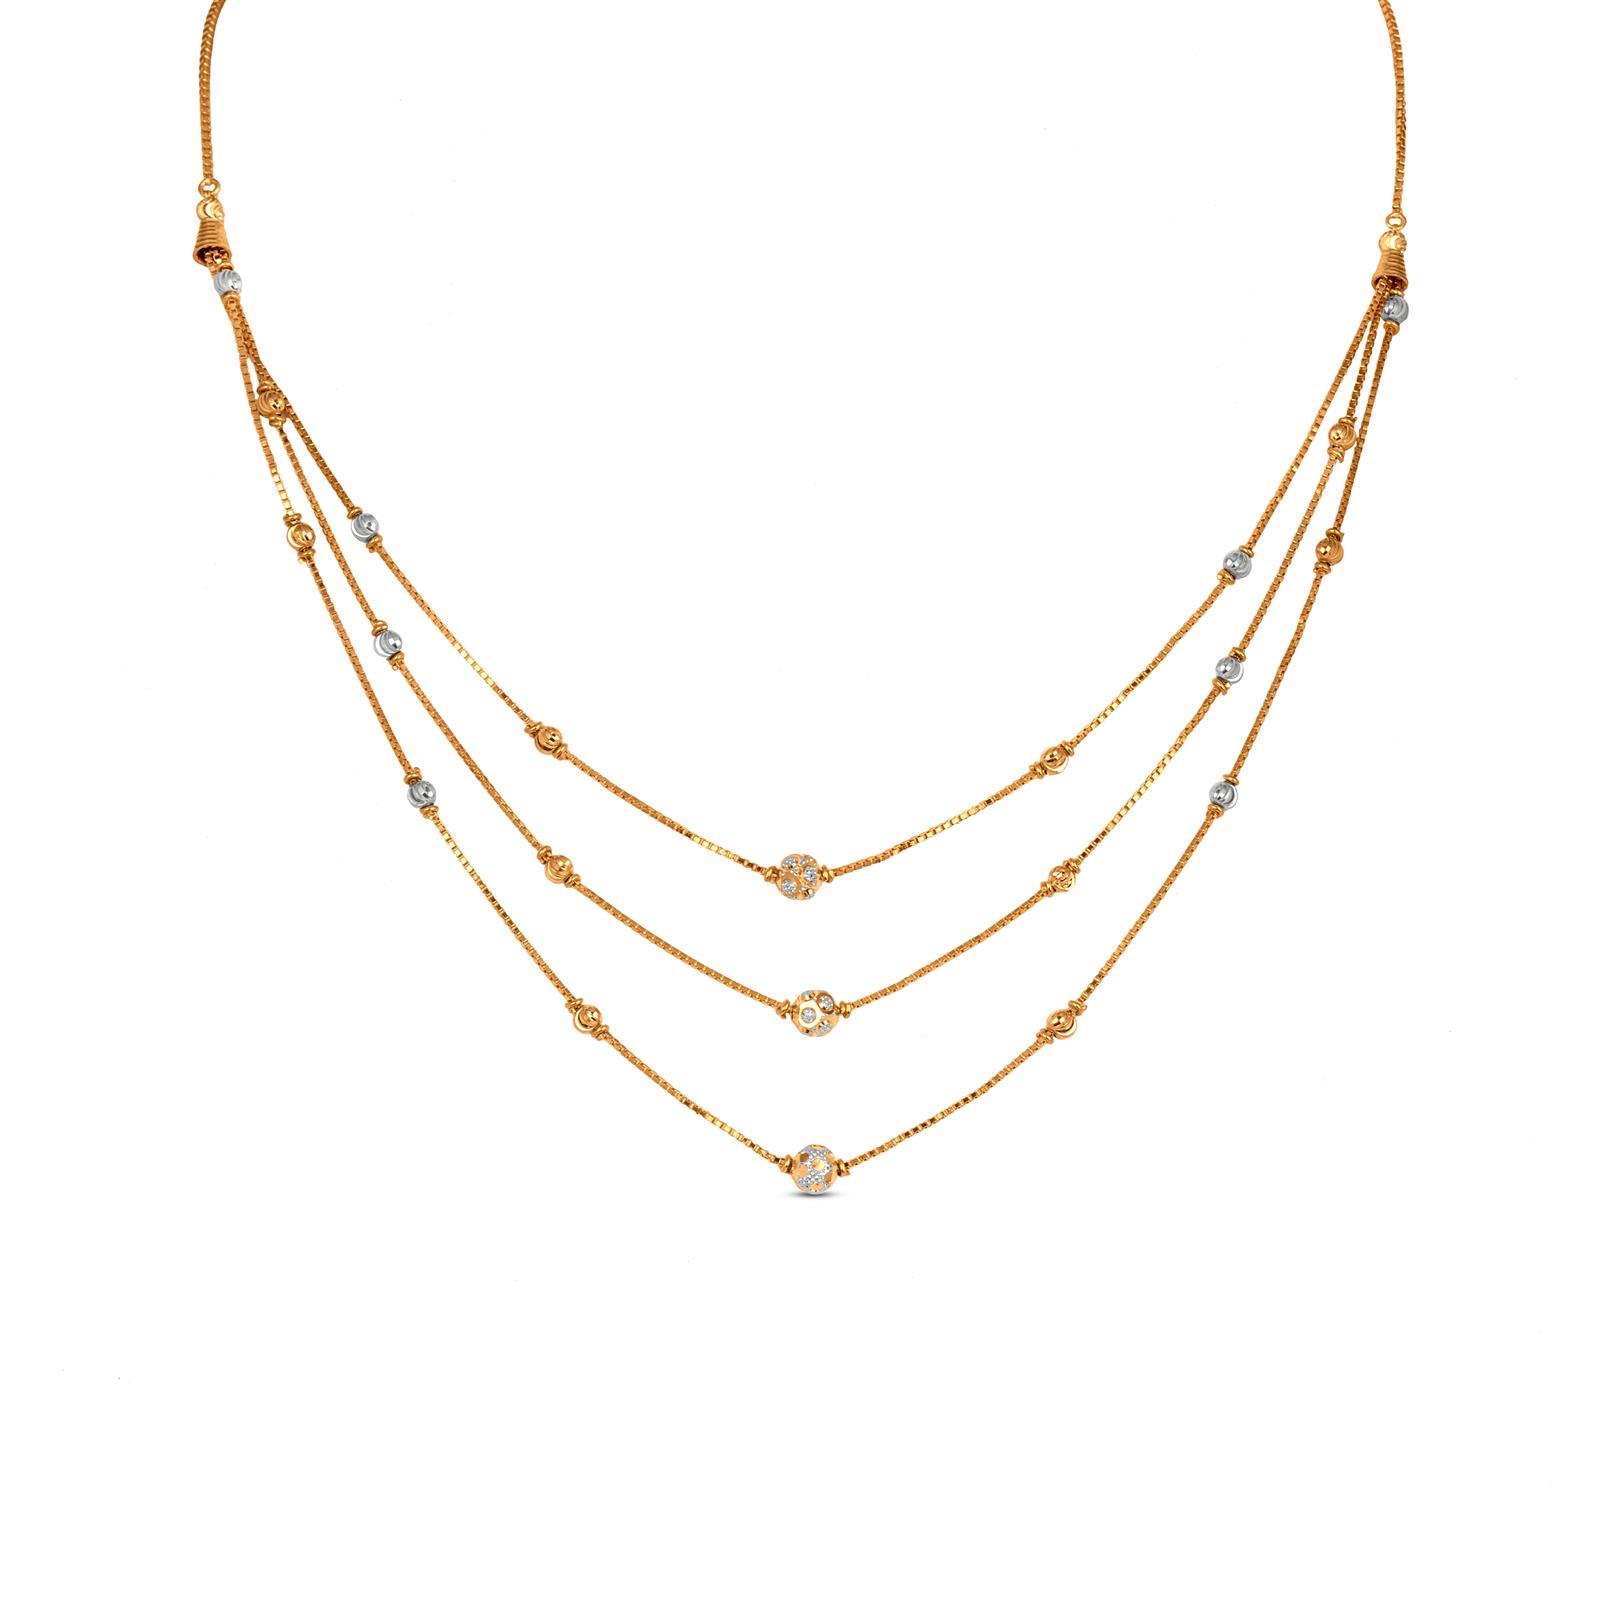 Buy Layered Chain In 22K Gold With Rhodium Online